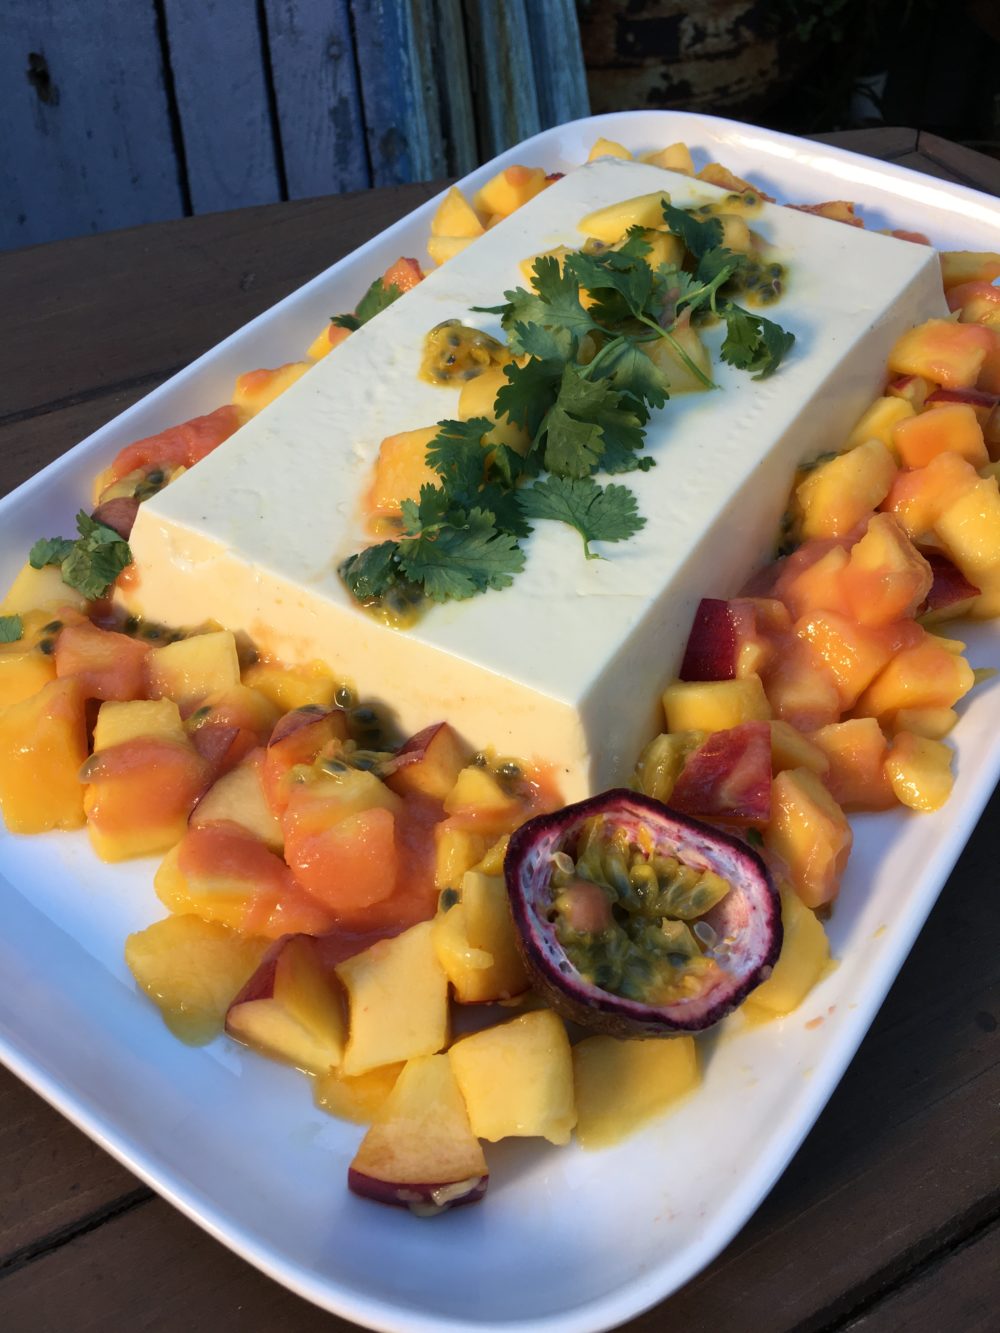 Cardamom Buttermilk Panna Cotta with Tropical Salad & Peach Coulis